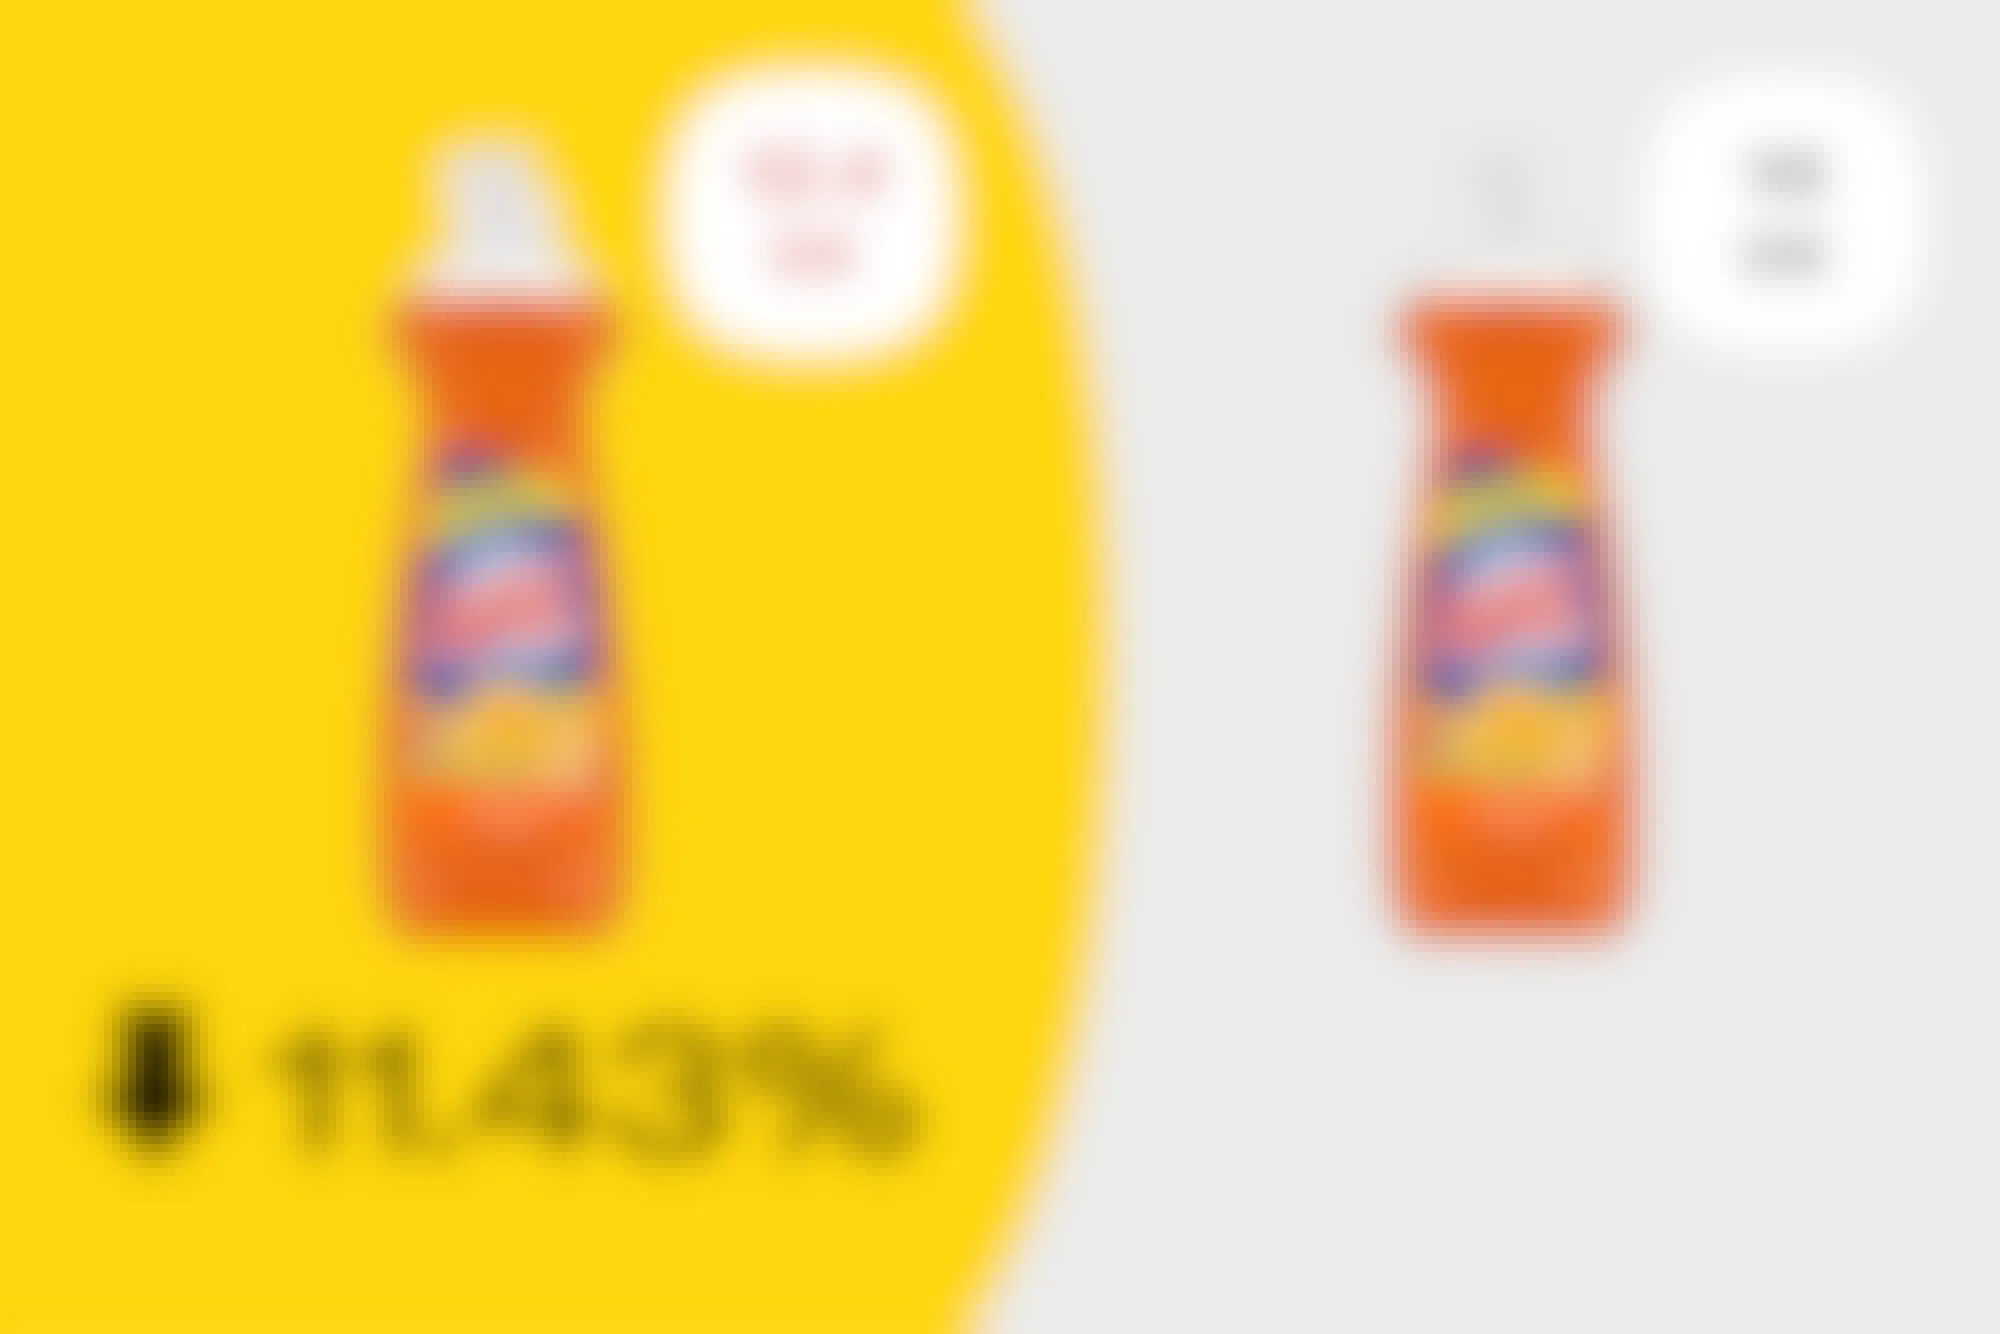 Graphic showing how AJAX soap is now 3.57% smaller thanks to shrinkflation